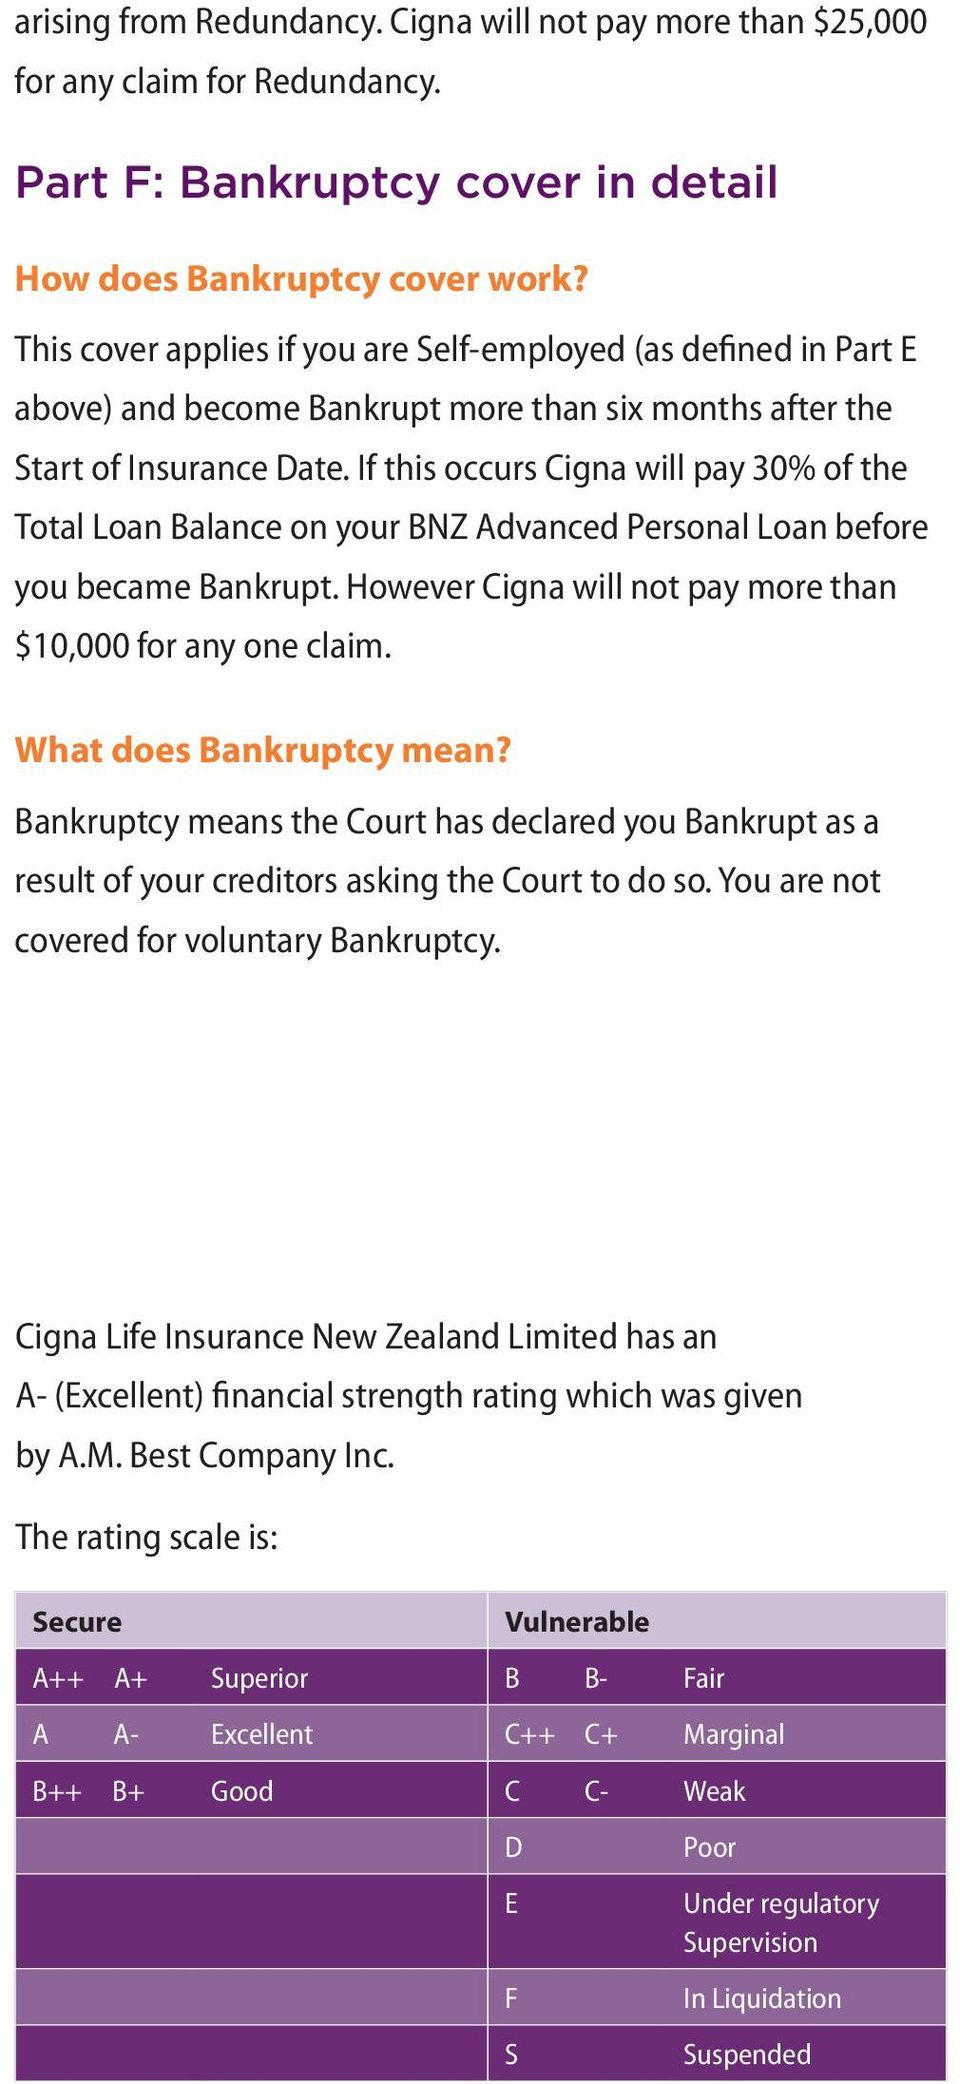 If this occurs Cigna will pay 30% of the Total Loan Balance on your BNZ Advanced Personal Loan before you became Bankrupt. However Cigna will not pay more than $10,000 for any one claim.